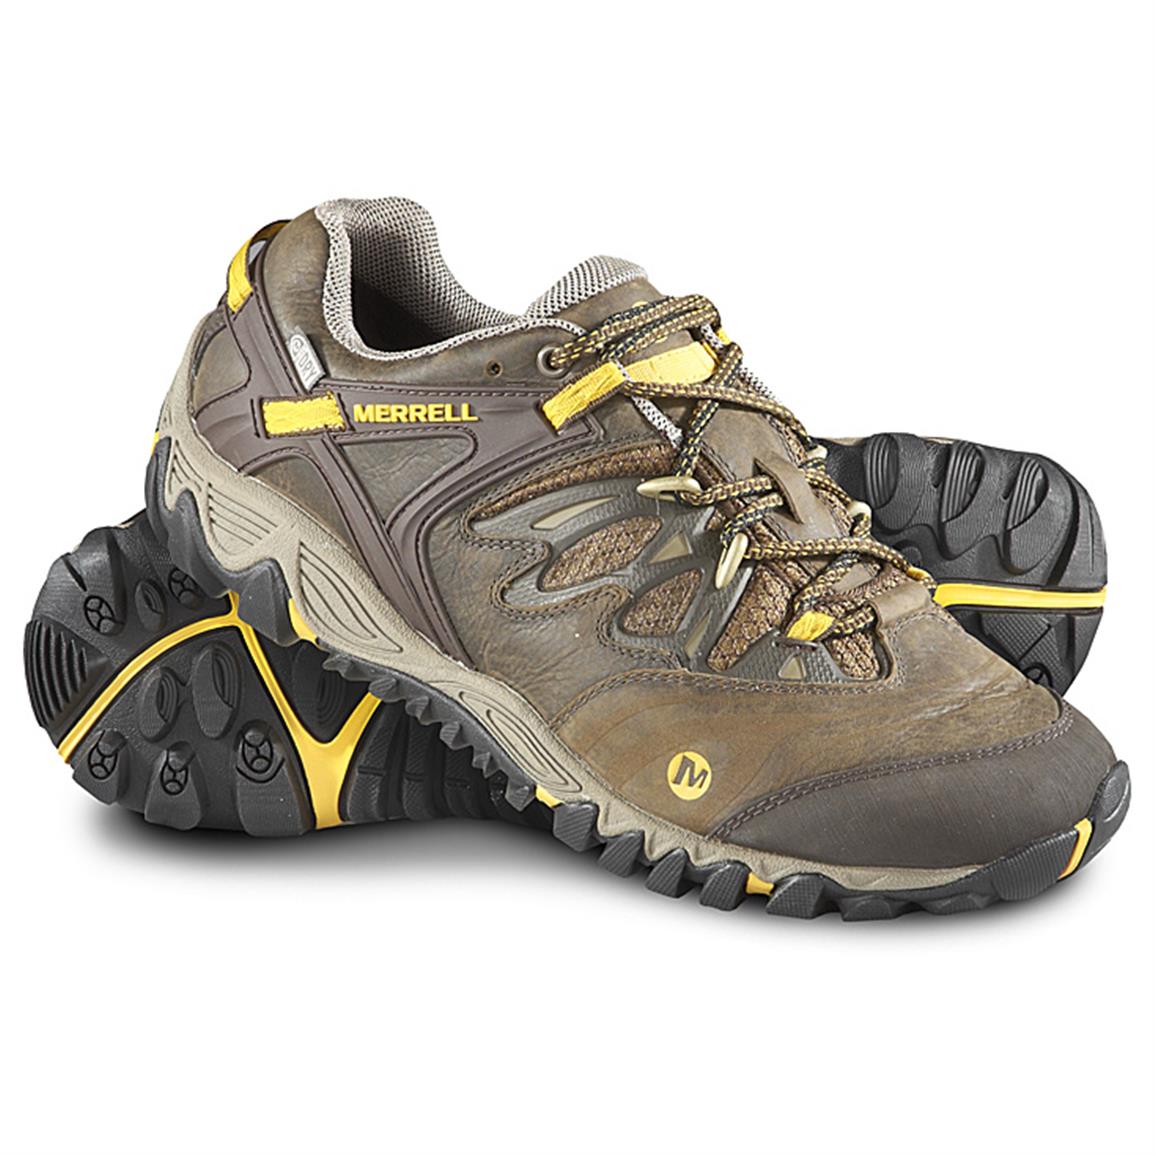 Merrell AllOut Blaze Hiking Shoes - 618750, Hiking Boots & Shoes at ...